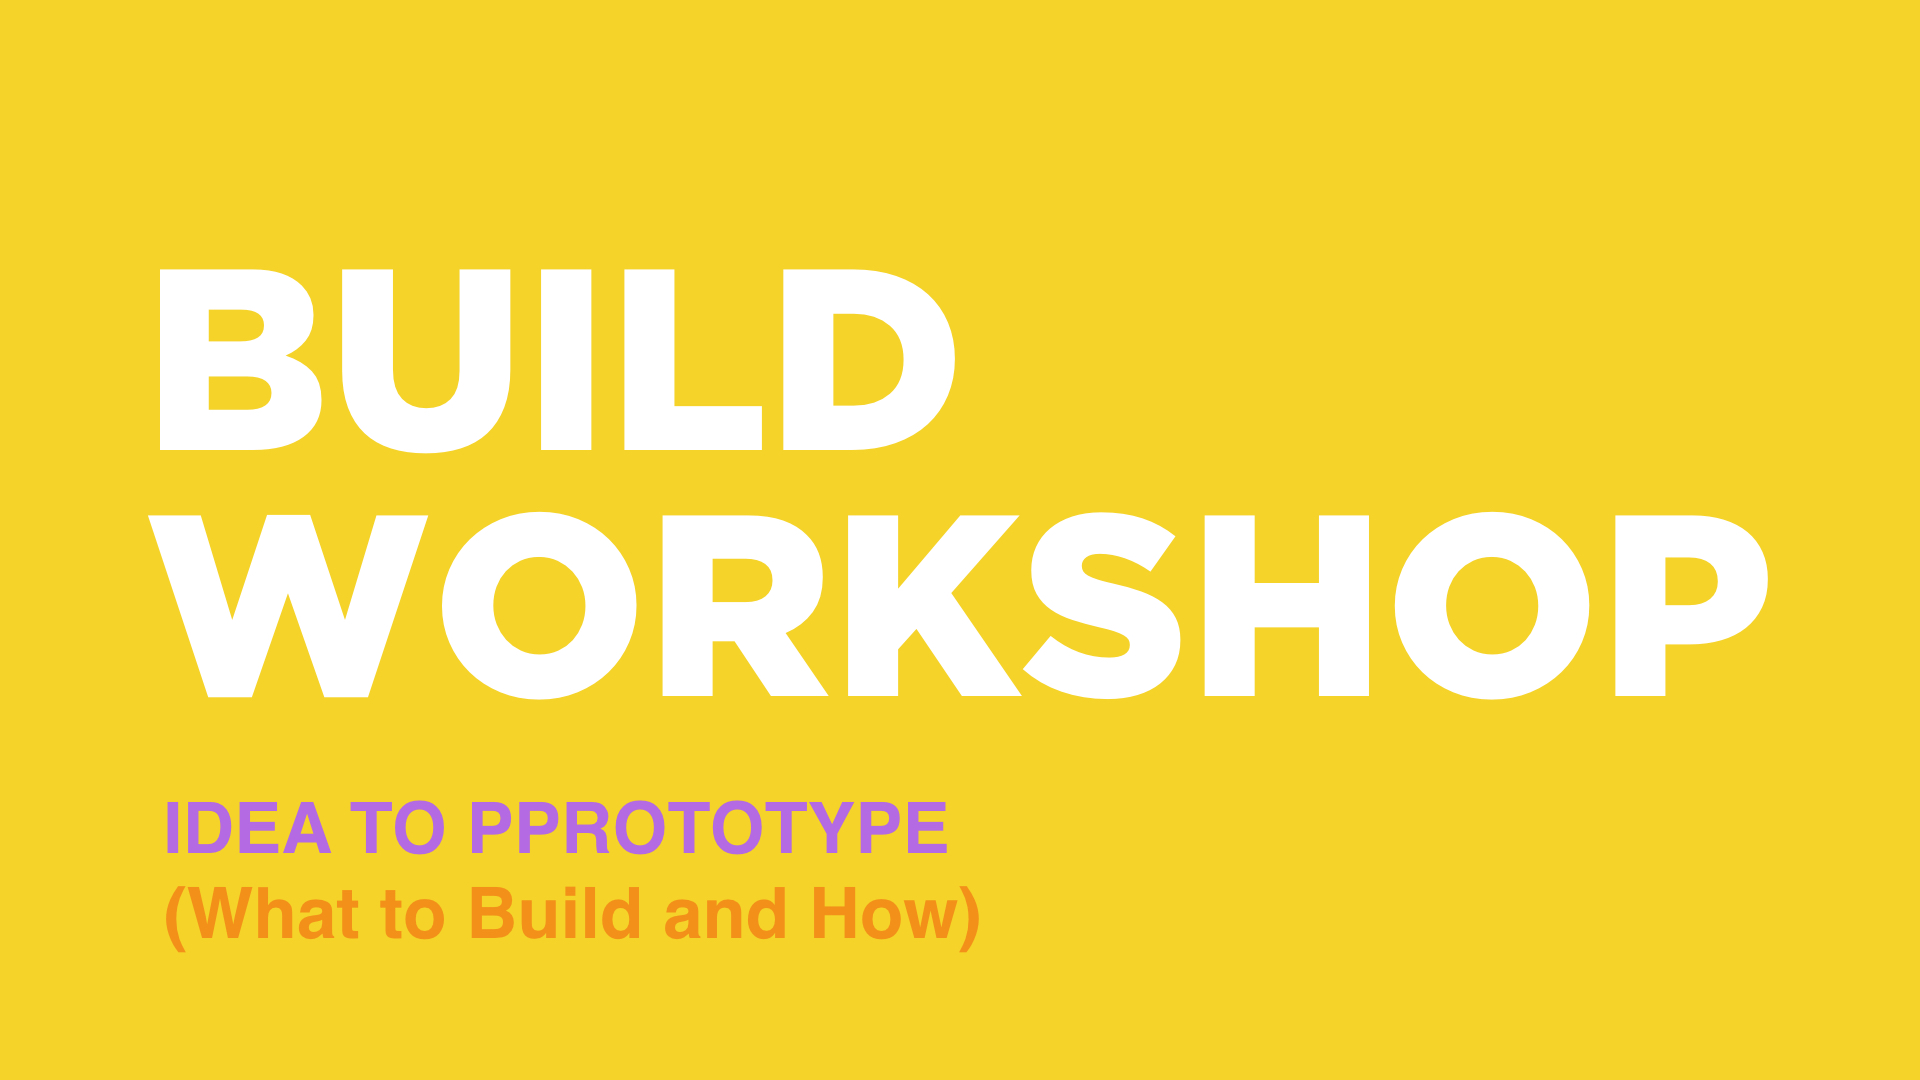 Build Workshop: Idea to Prototype (What to Build and How)